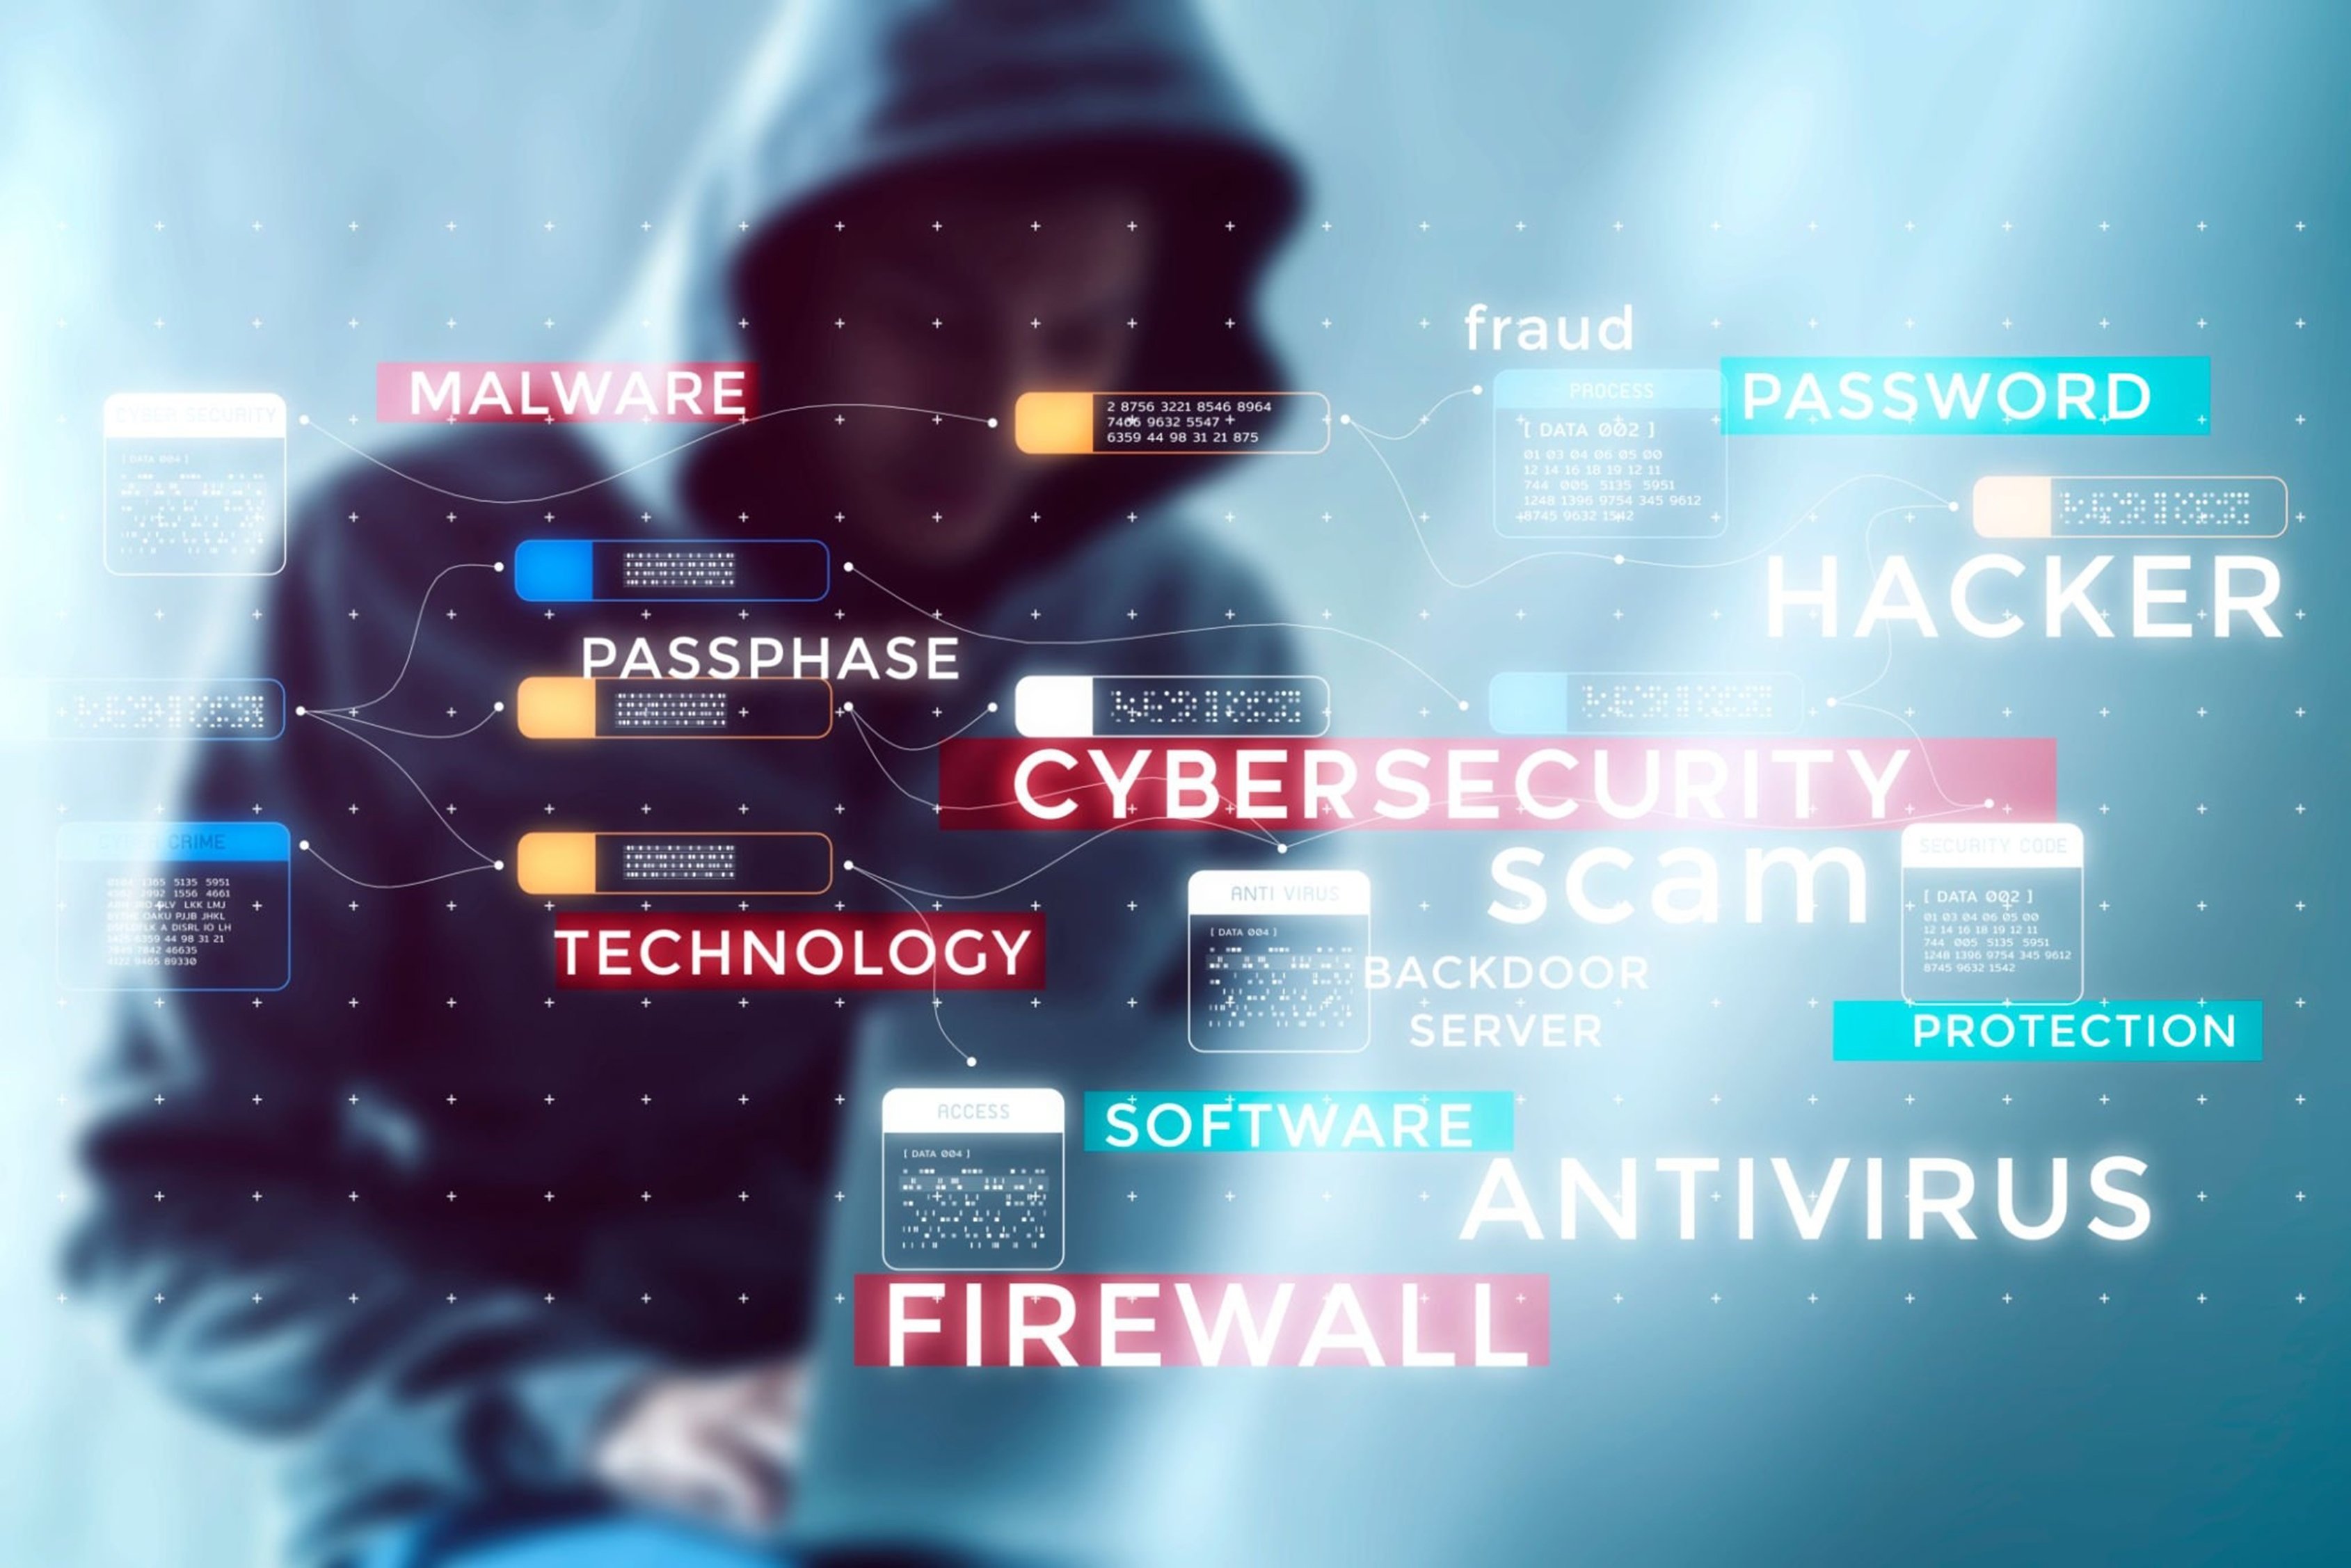 cybersecurity-cybercrime-internet-scam-anonymous-hacker-crypto-currency-investment-digital-network-vpn-technology-computer-virus-attack-risk-protection